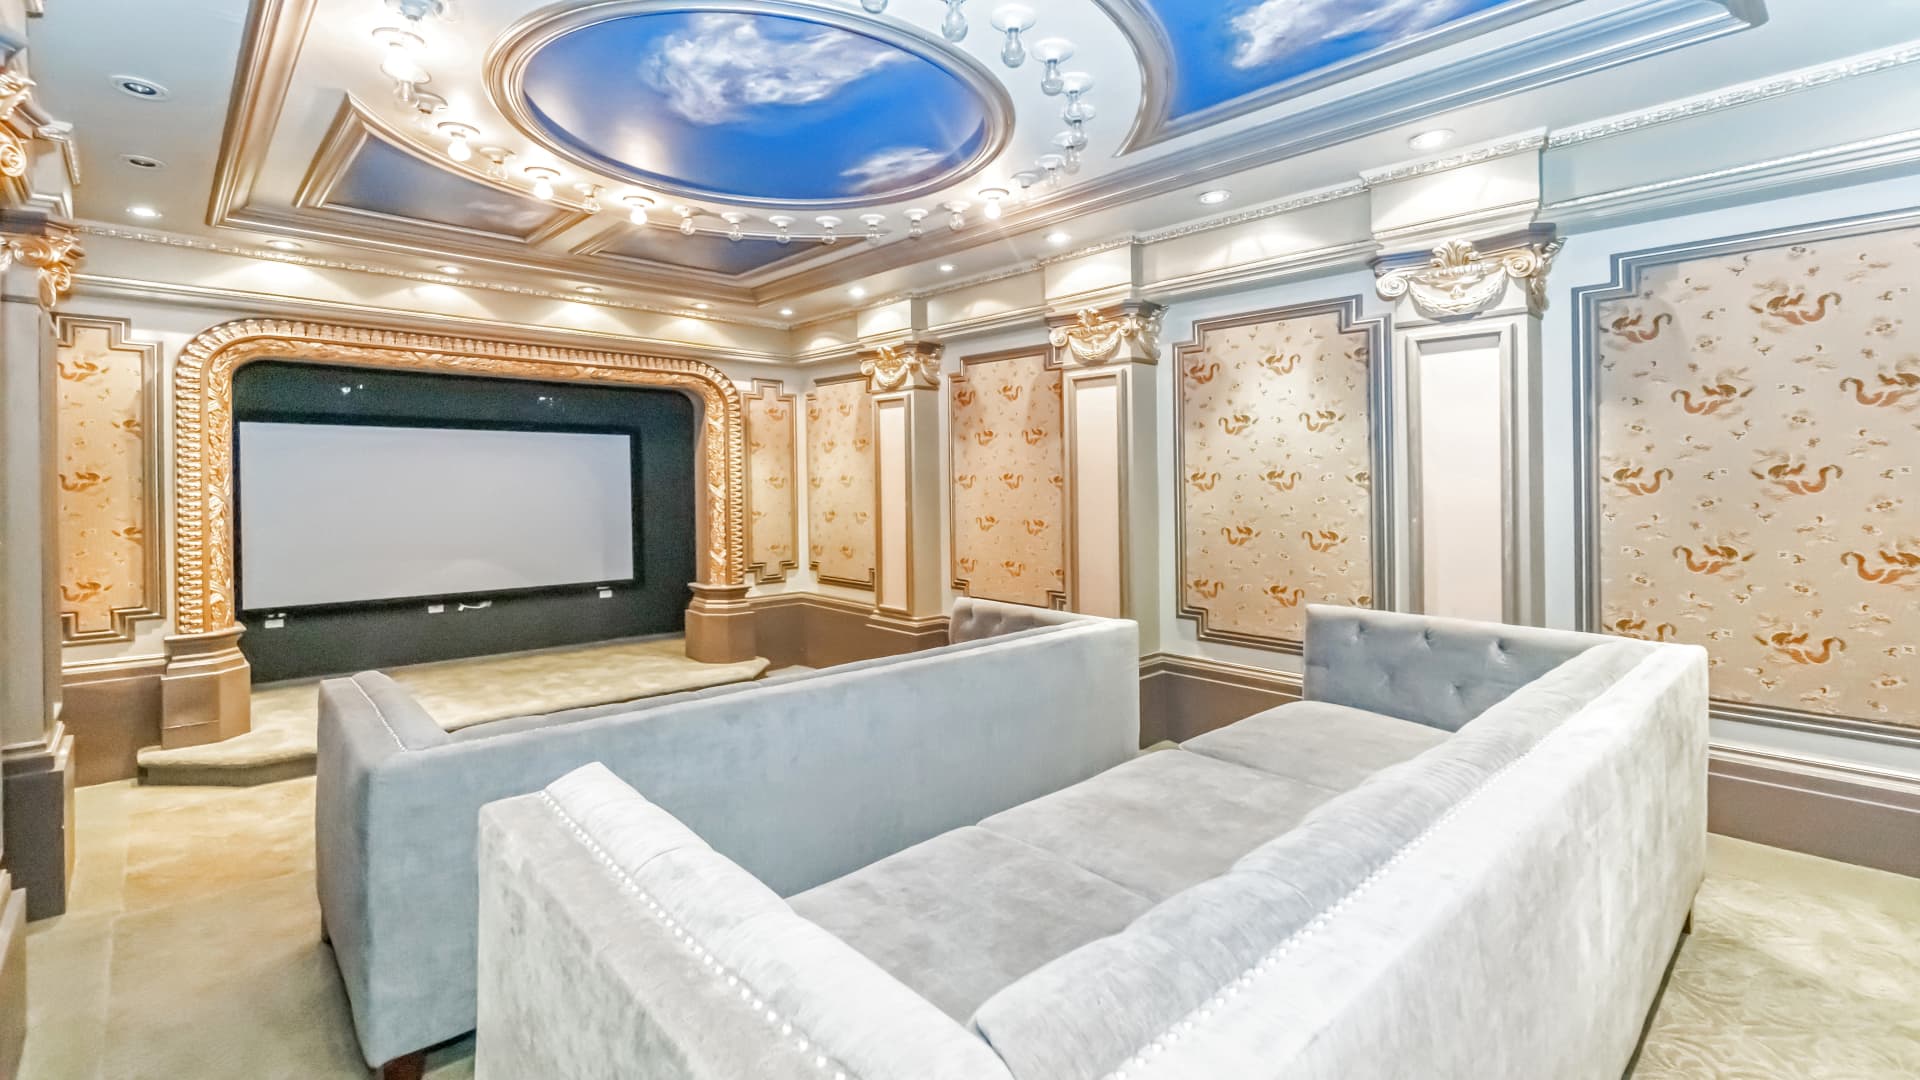 The home includes a screening room.